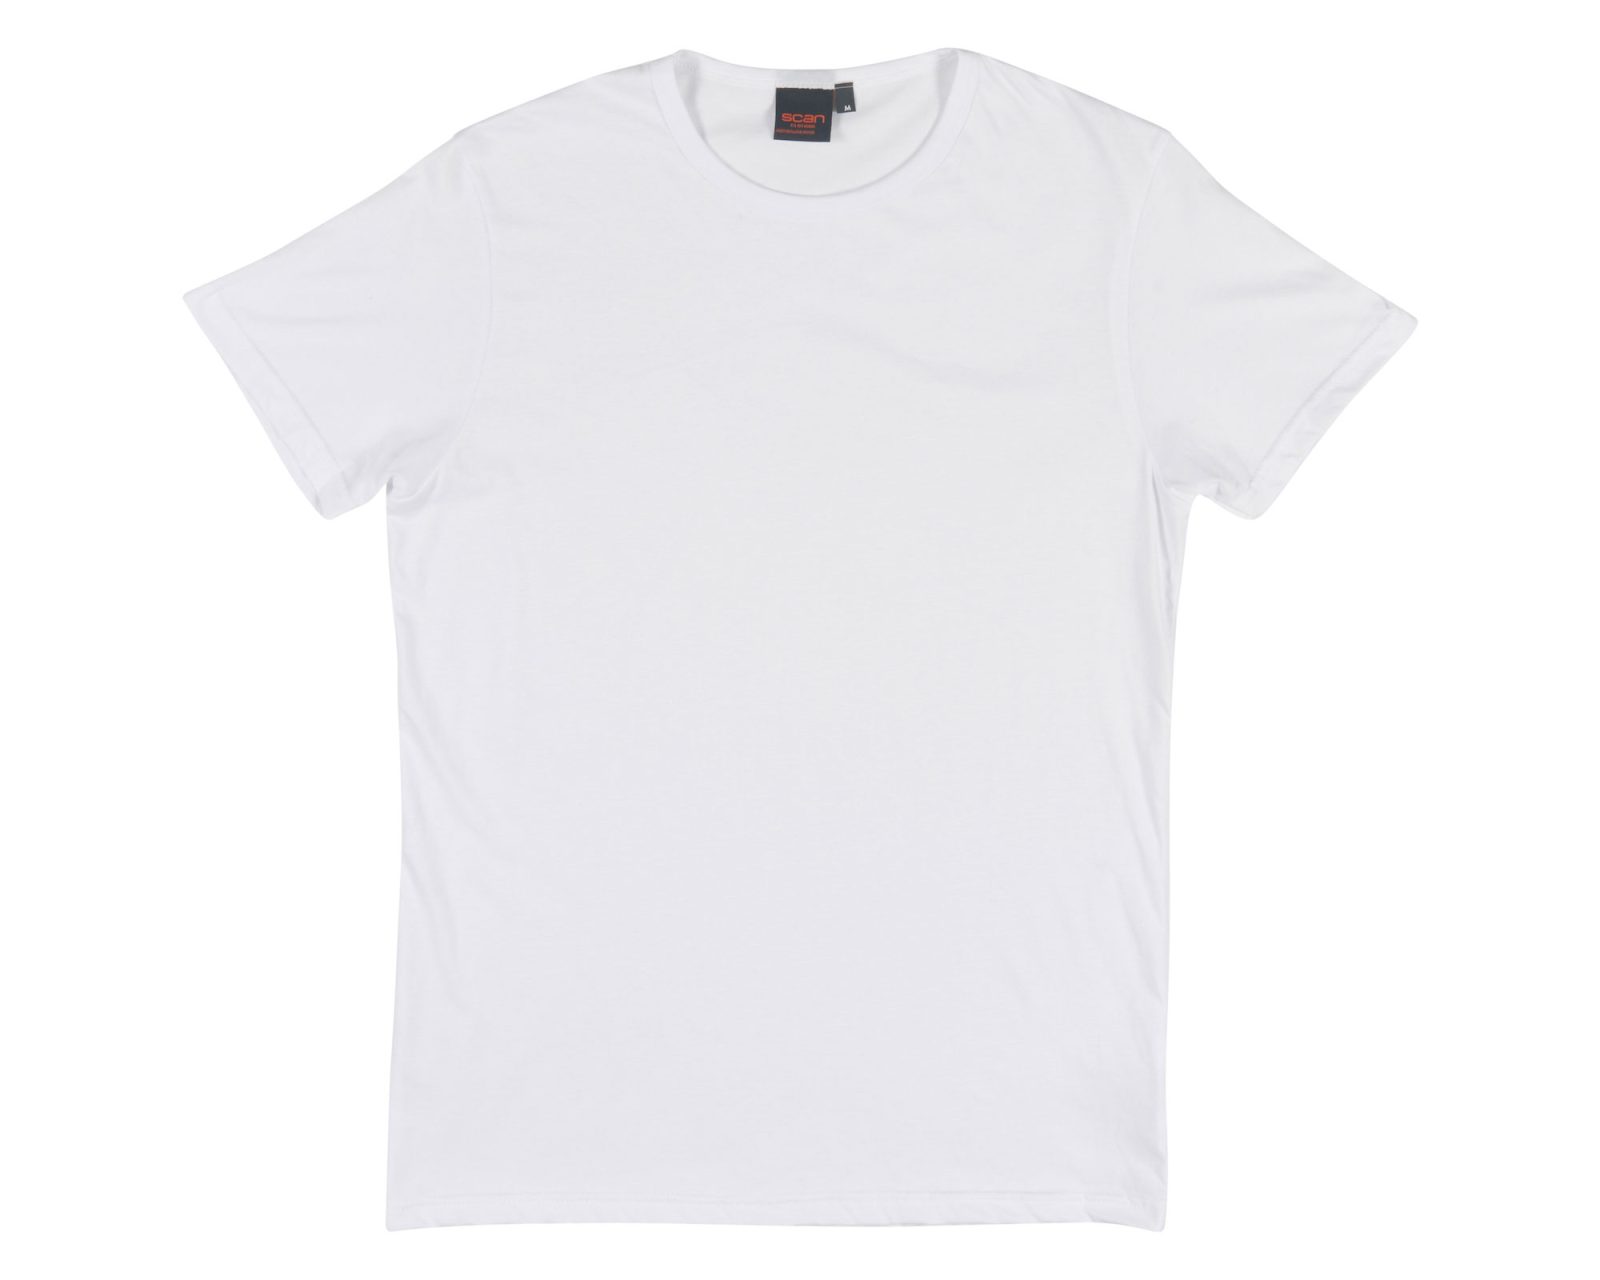 qualitops-mens-fitted-short-sleeve-tee-co-011